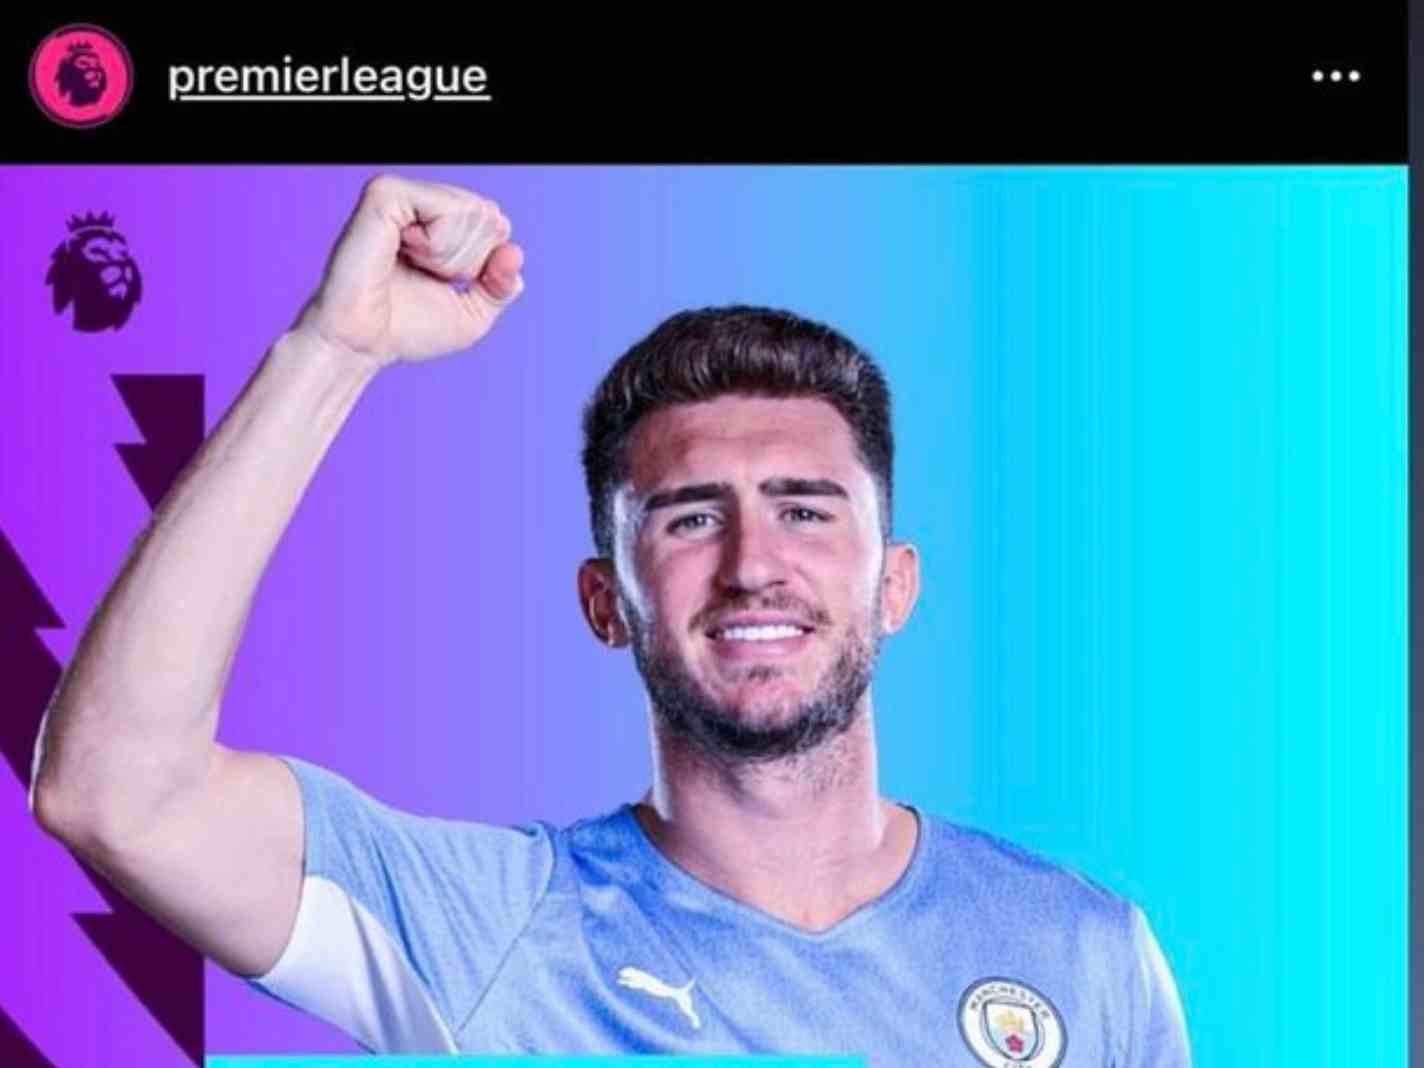 PL defender reacts after Aymeric Laporte throws social media tantrum over TOTY snub